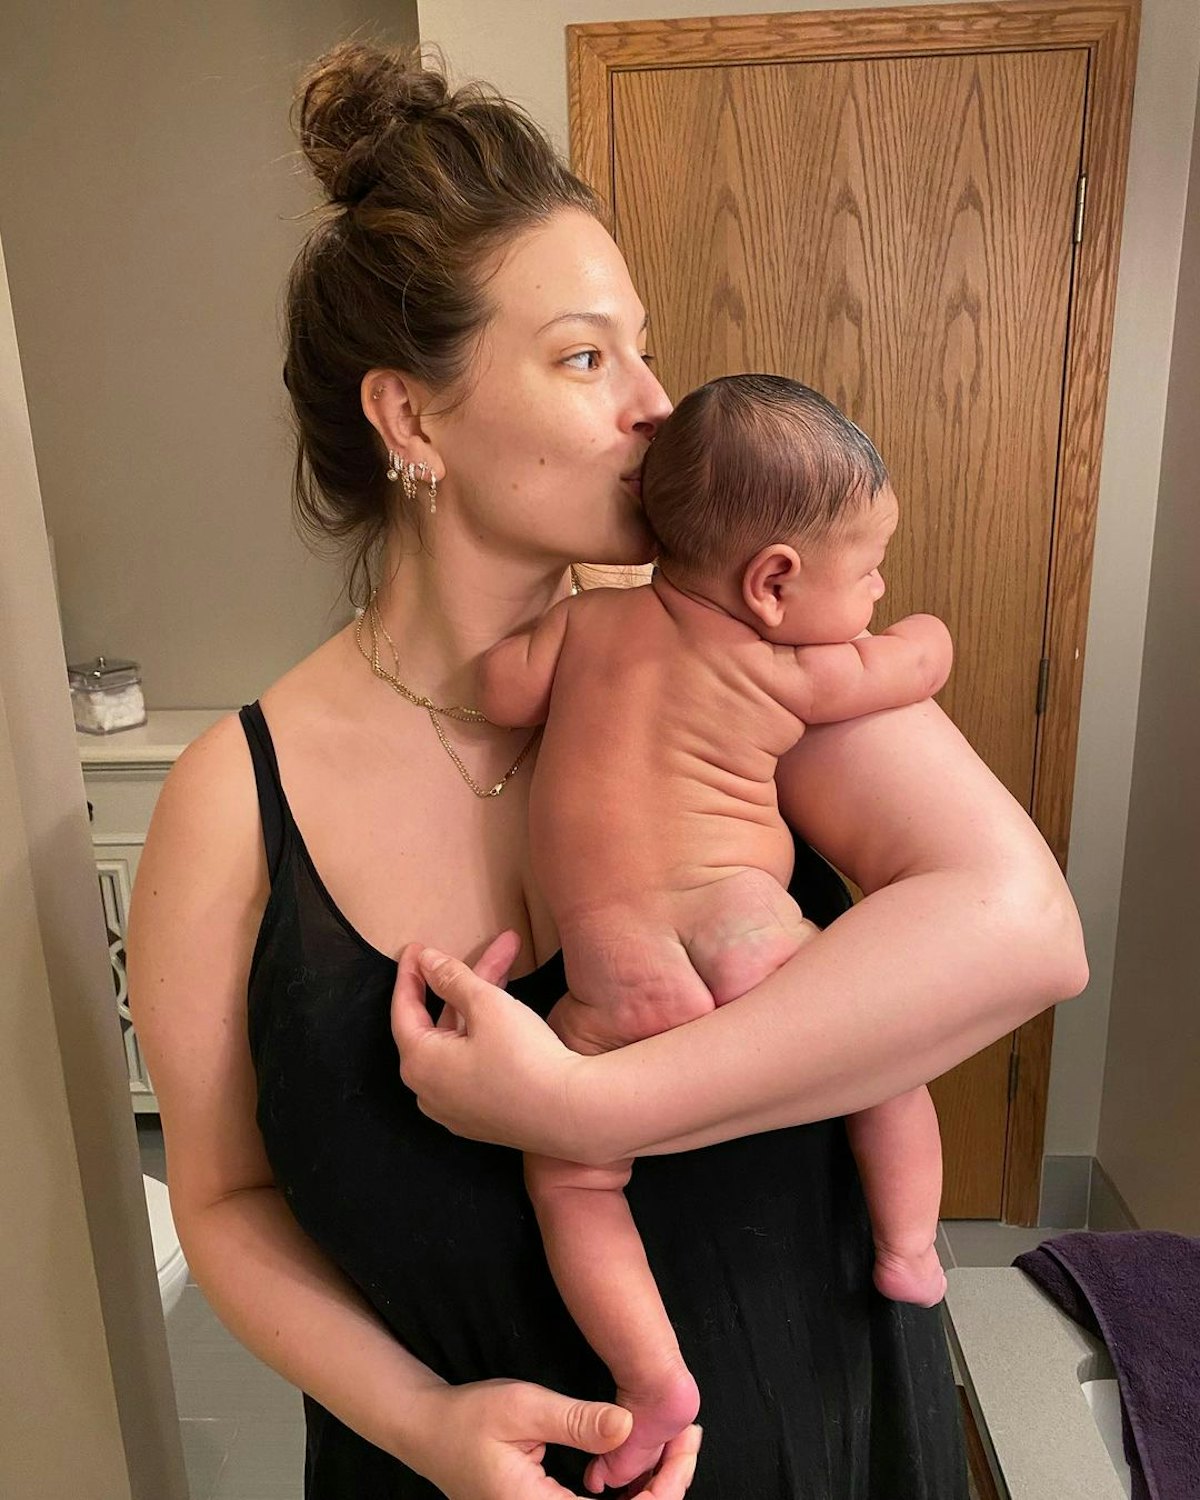 Ashley Graham with baby.